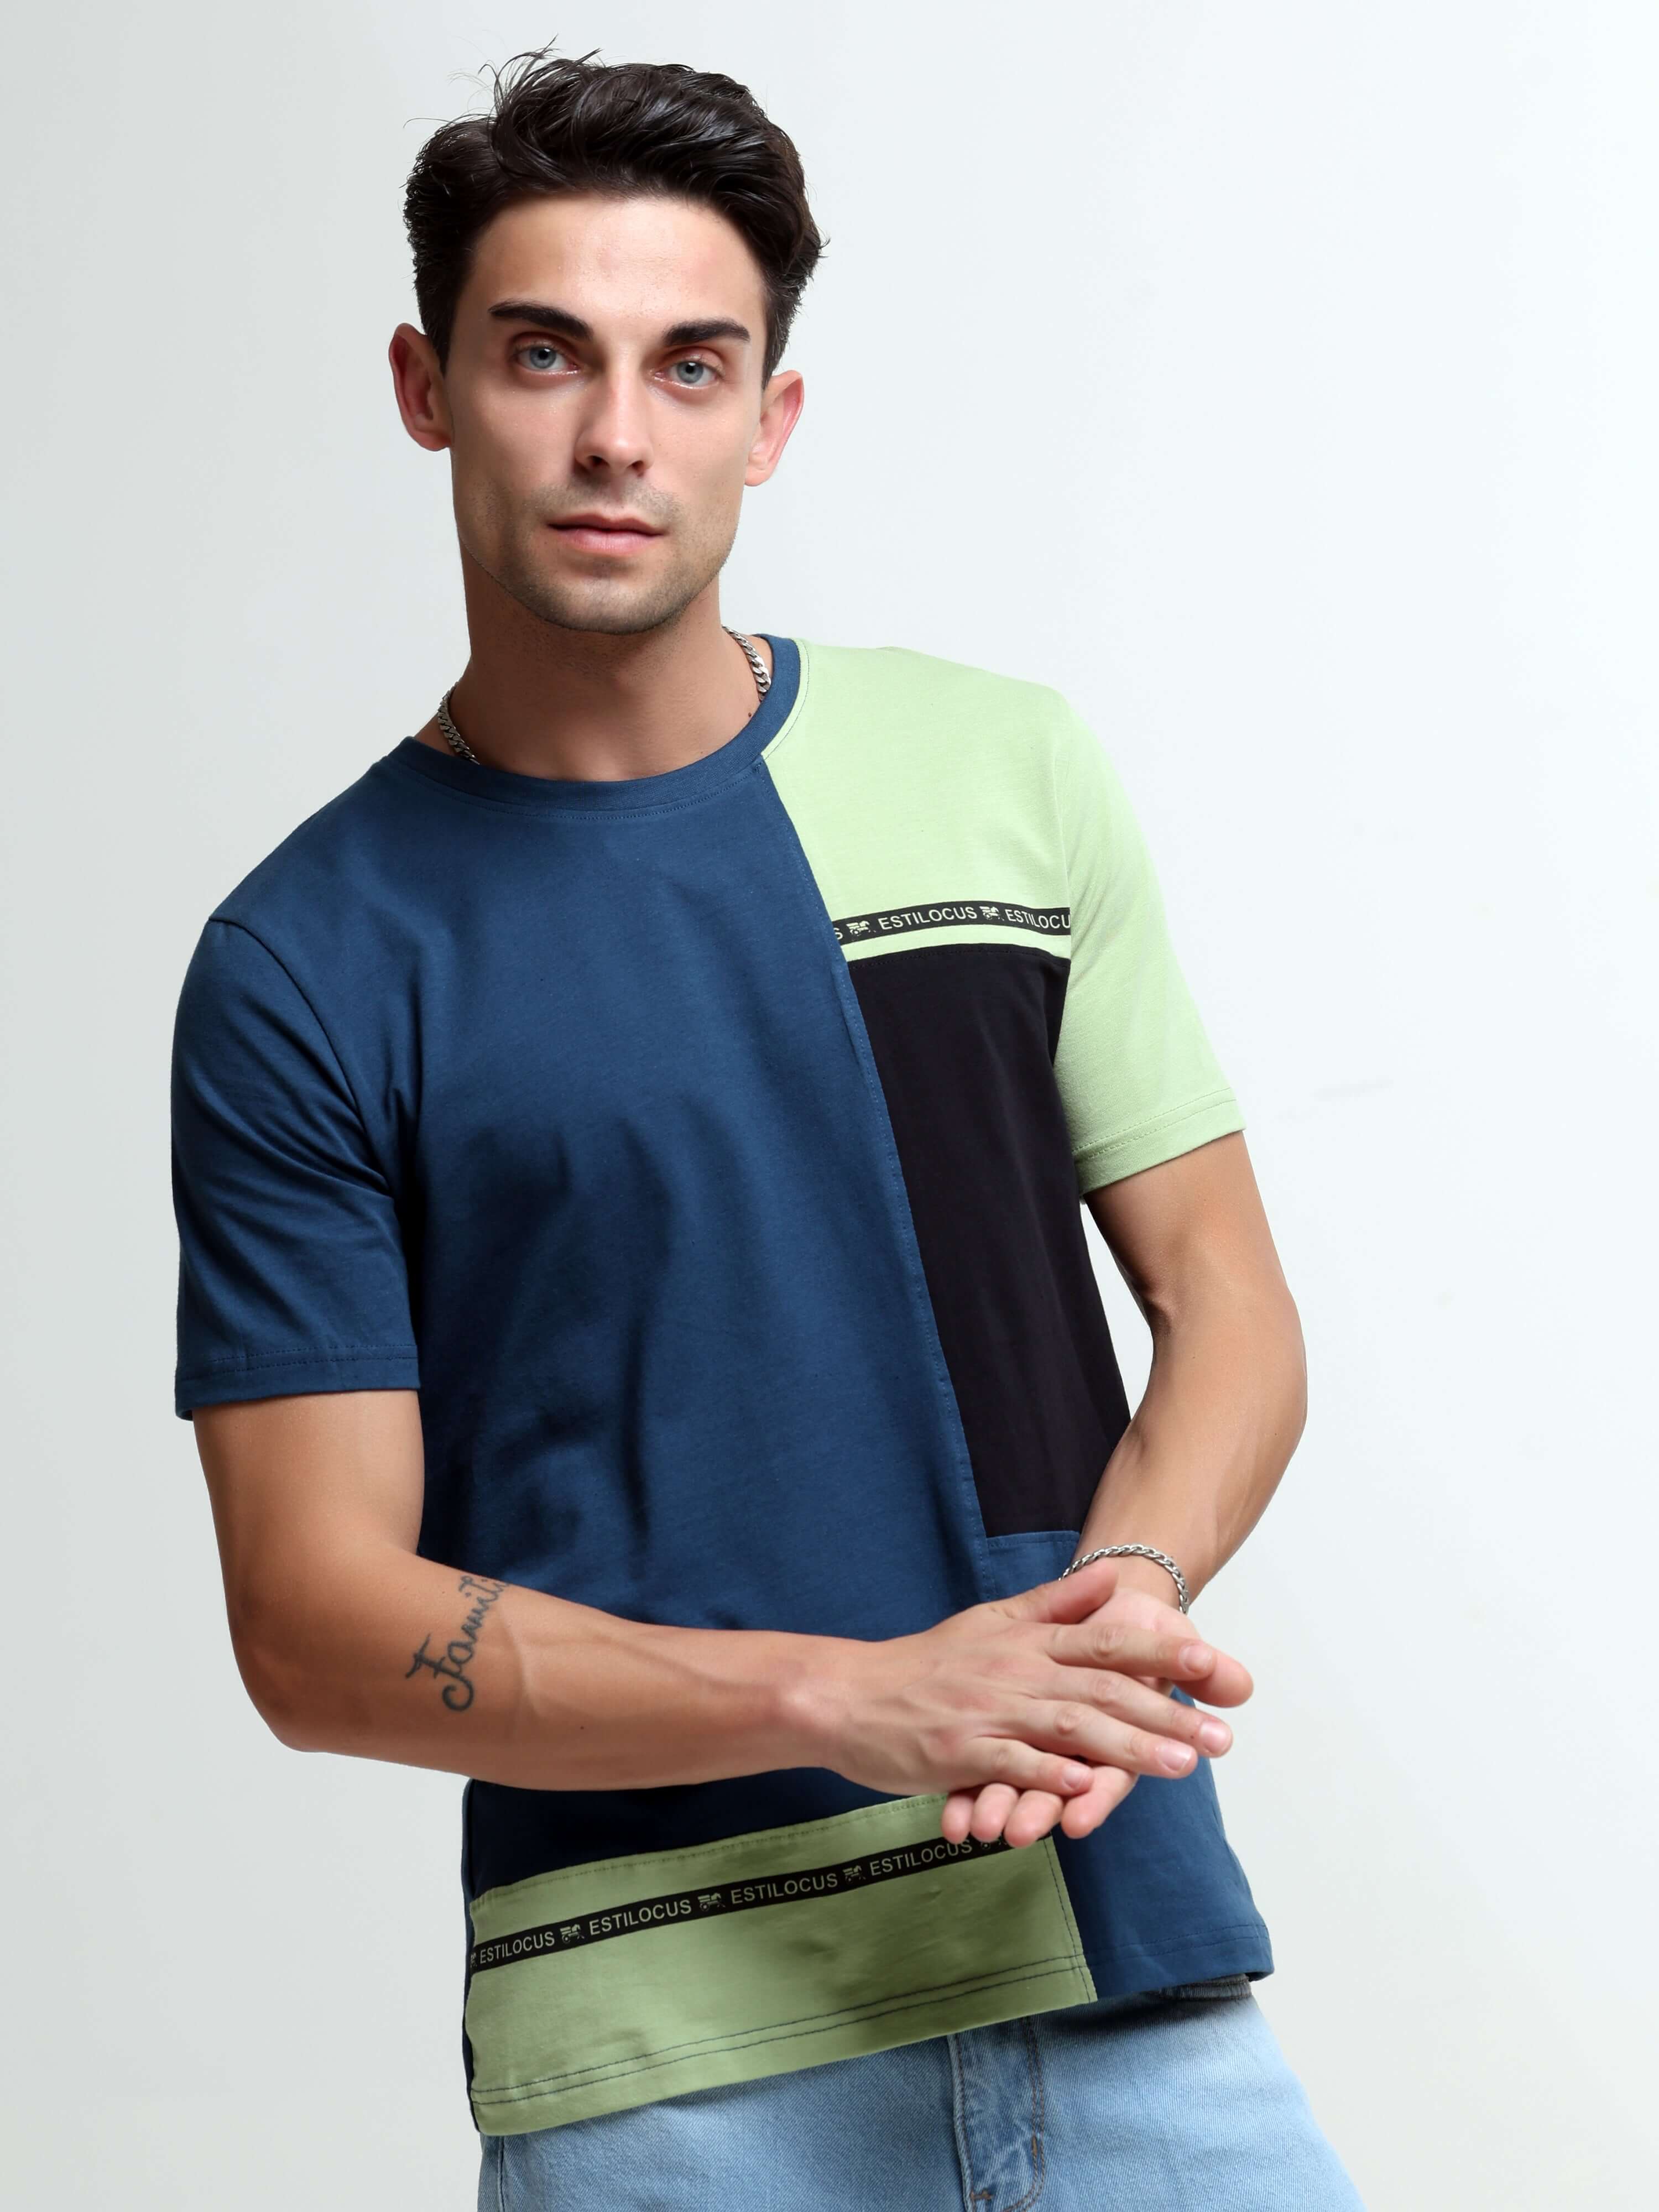 Thrive cardamom green light weight tshirt shop online at Estilocus. This relax-fit Cut and Sew T-shirt is comfortable and the perfect essential all year round. Pair it with white jeans and sneakers and layer it up with a denim jacket for a casual and put-